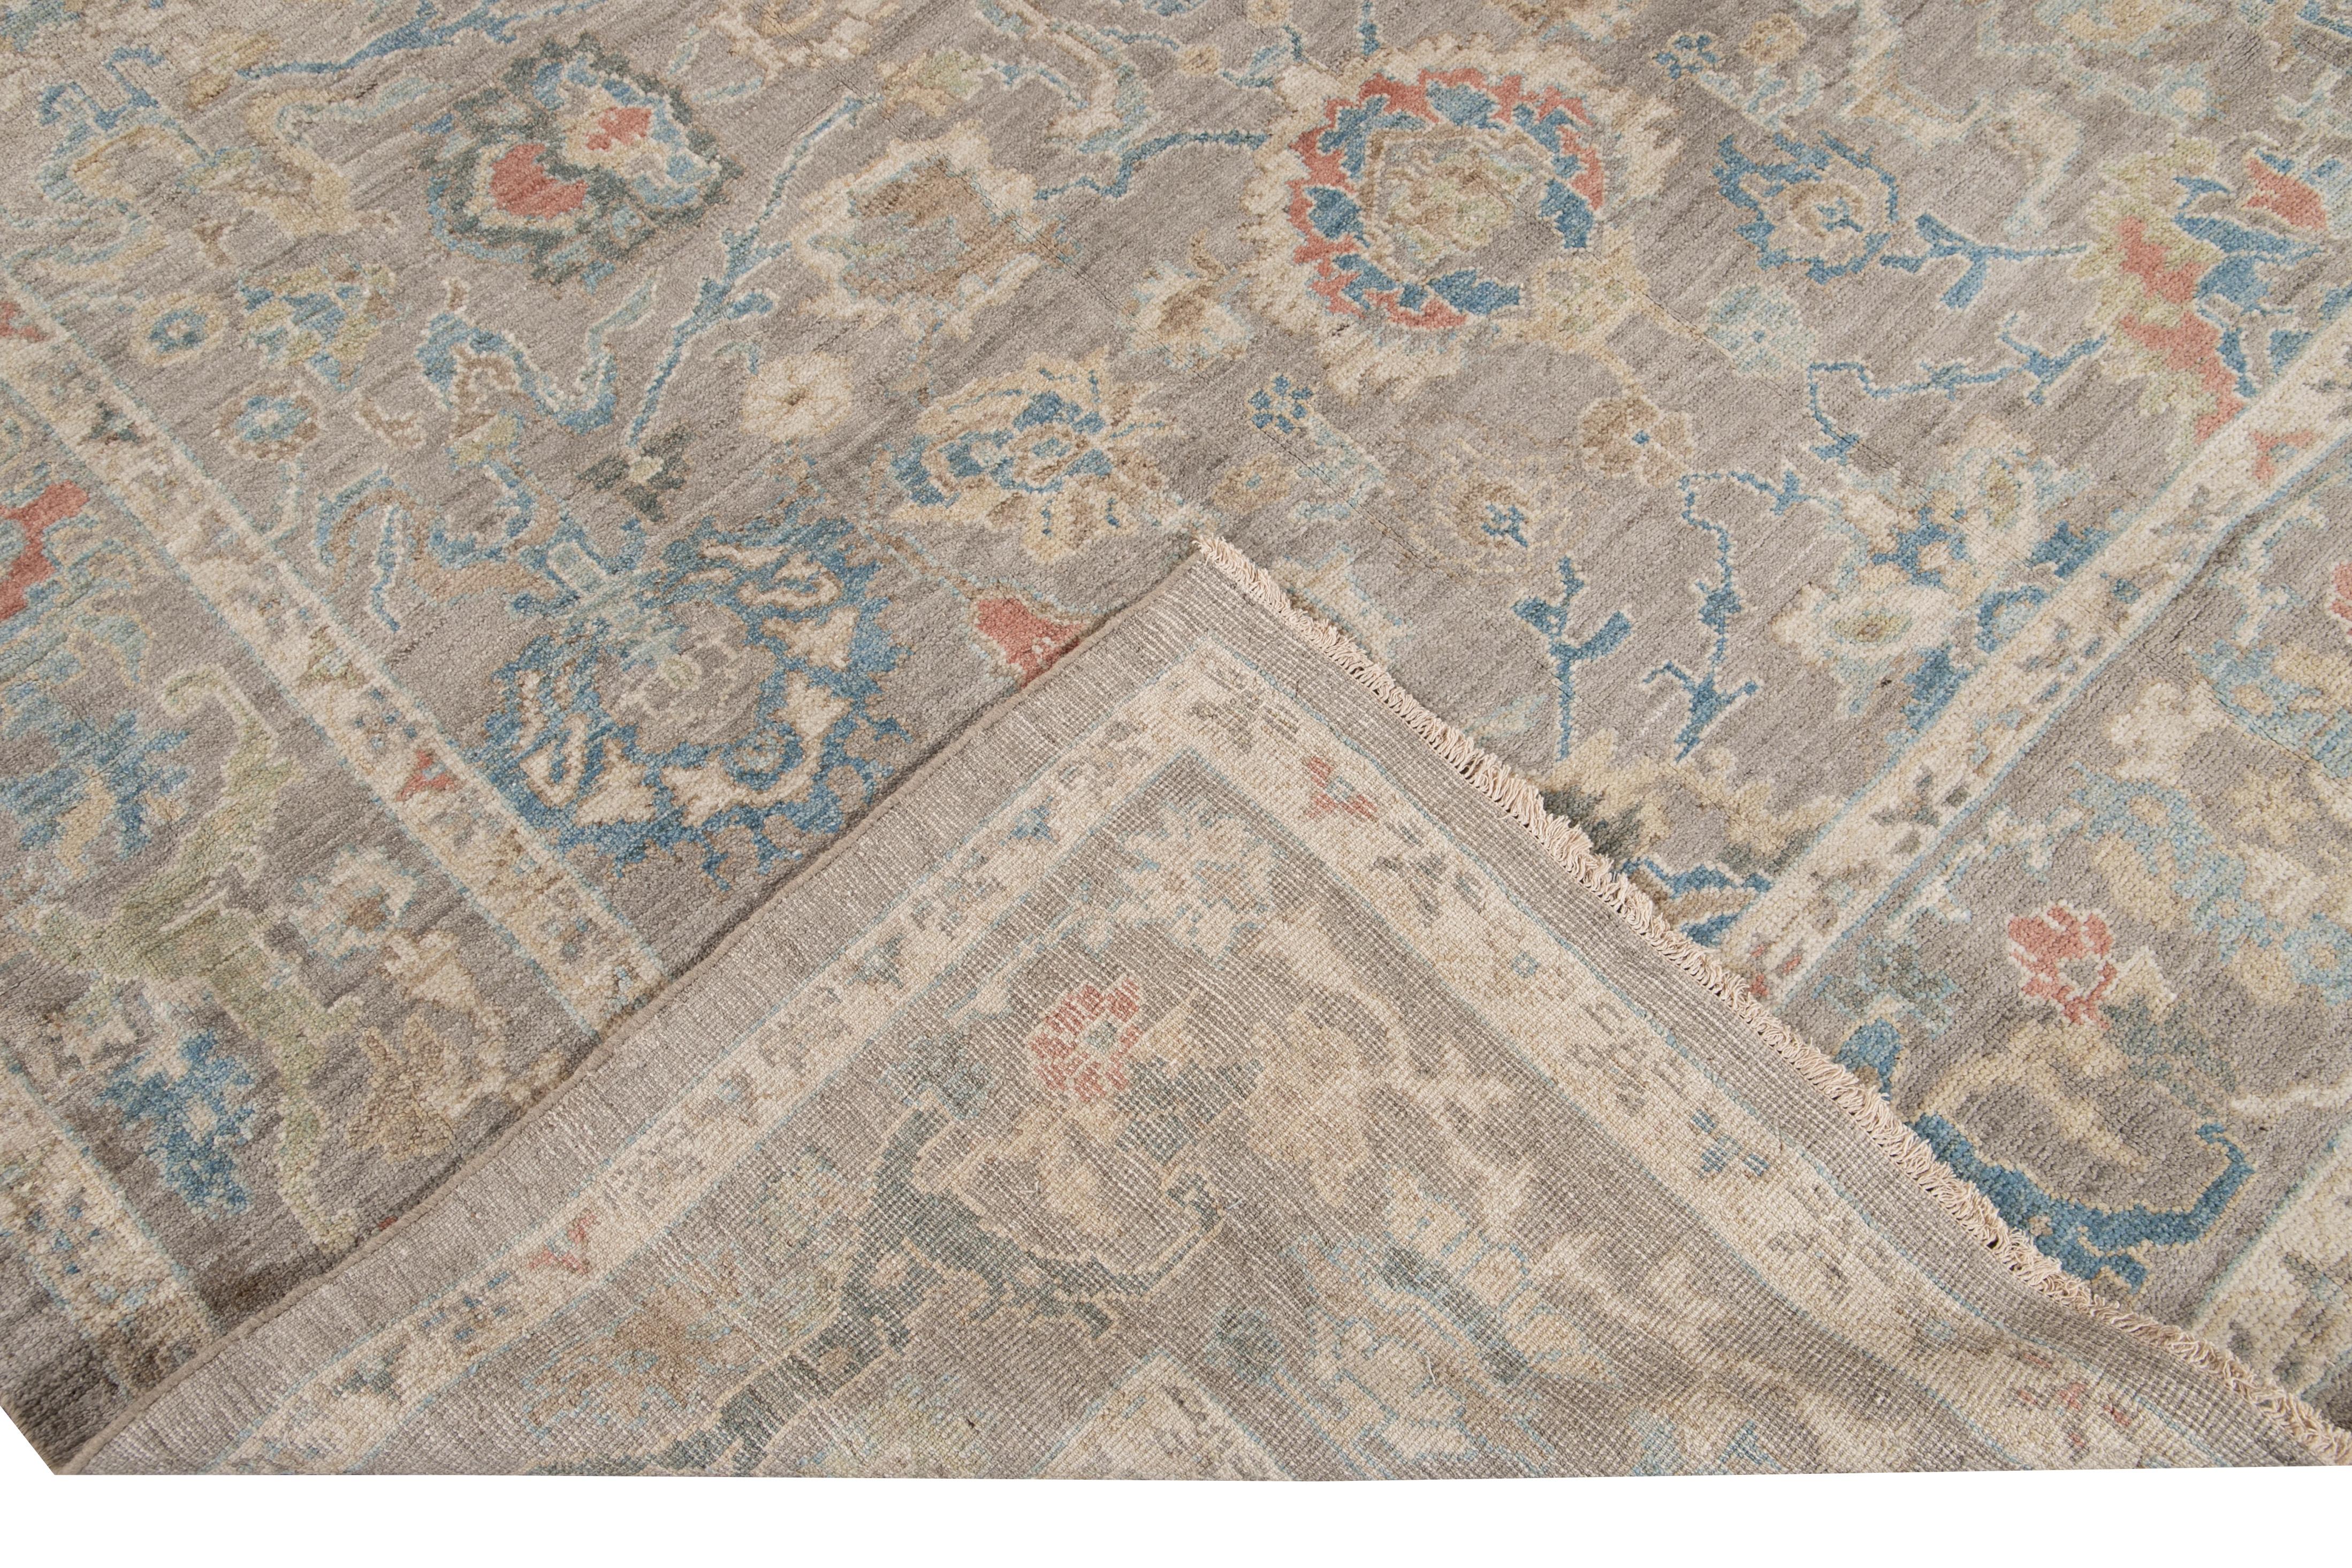 Beautiful modern Sultanabad hand knotted square wool rug with a gray and beige field. This Sultanabad rug has a multi-color accent in a gorgeous all-over Classic botanical floral design.

This rug measures: 8'2